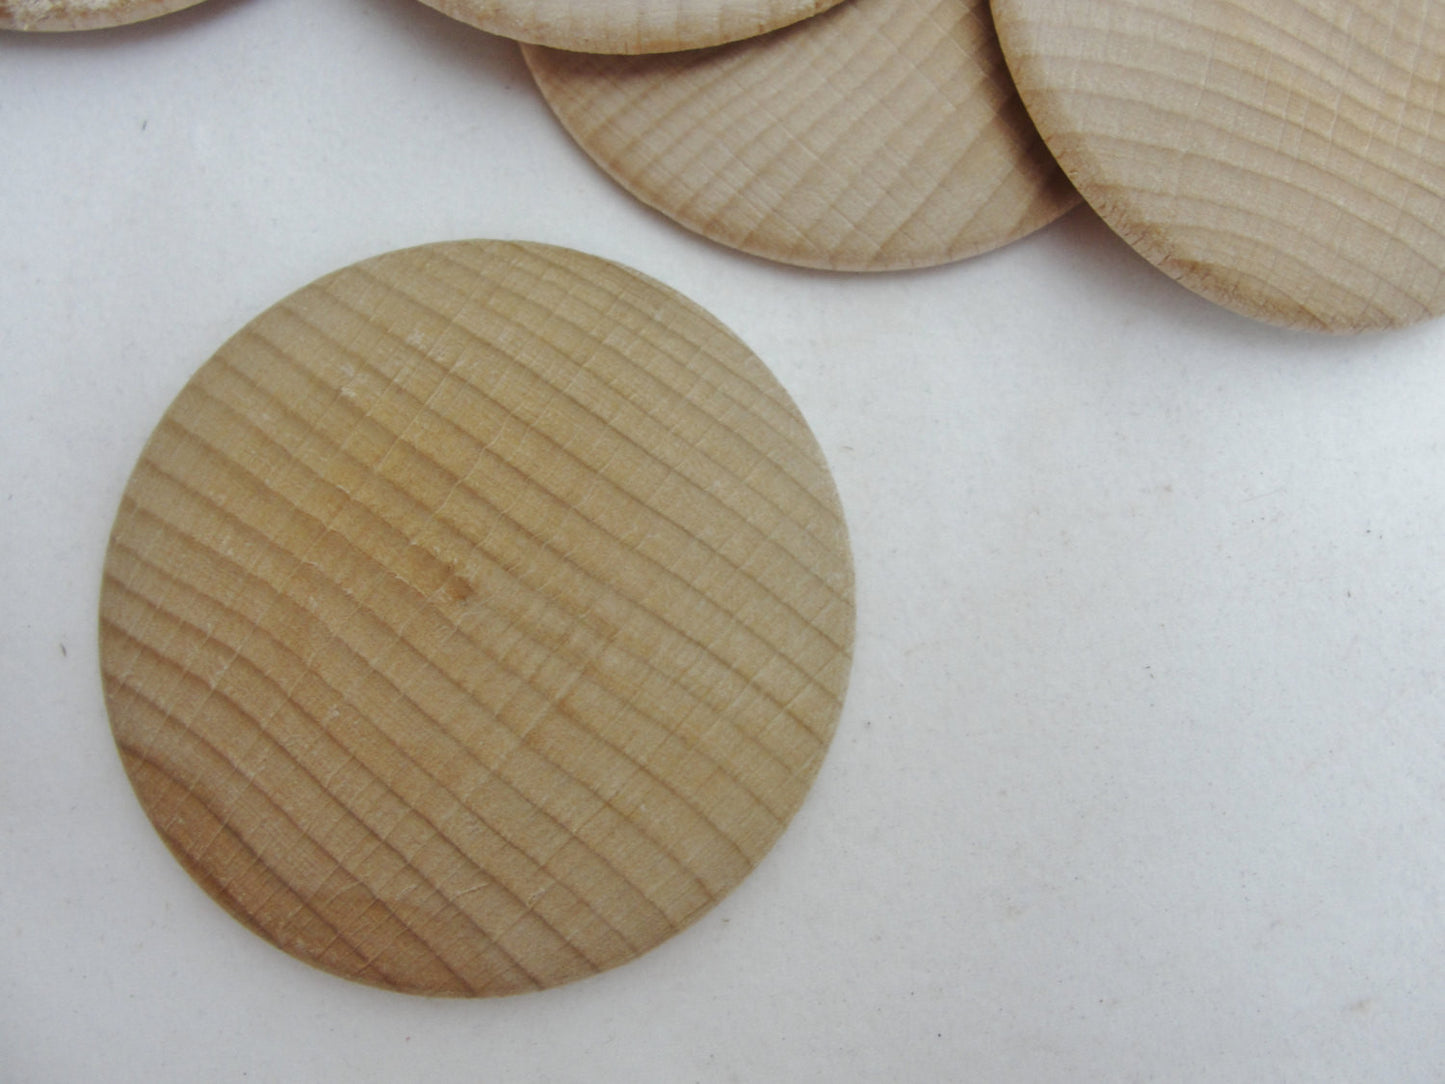 Large Wooden domed disc 2 1/4" wide x 5/16" thick set of 12 - Wood parts - Craft Supply House